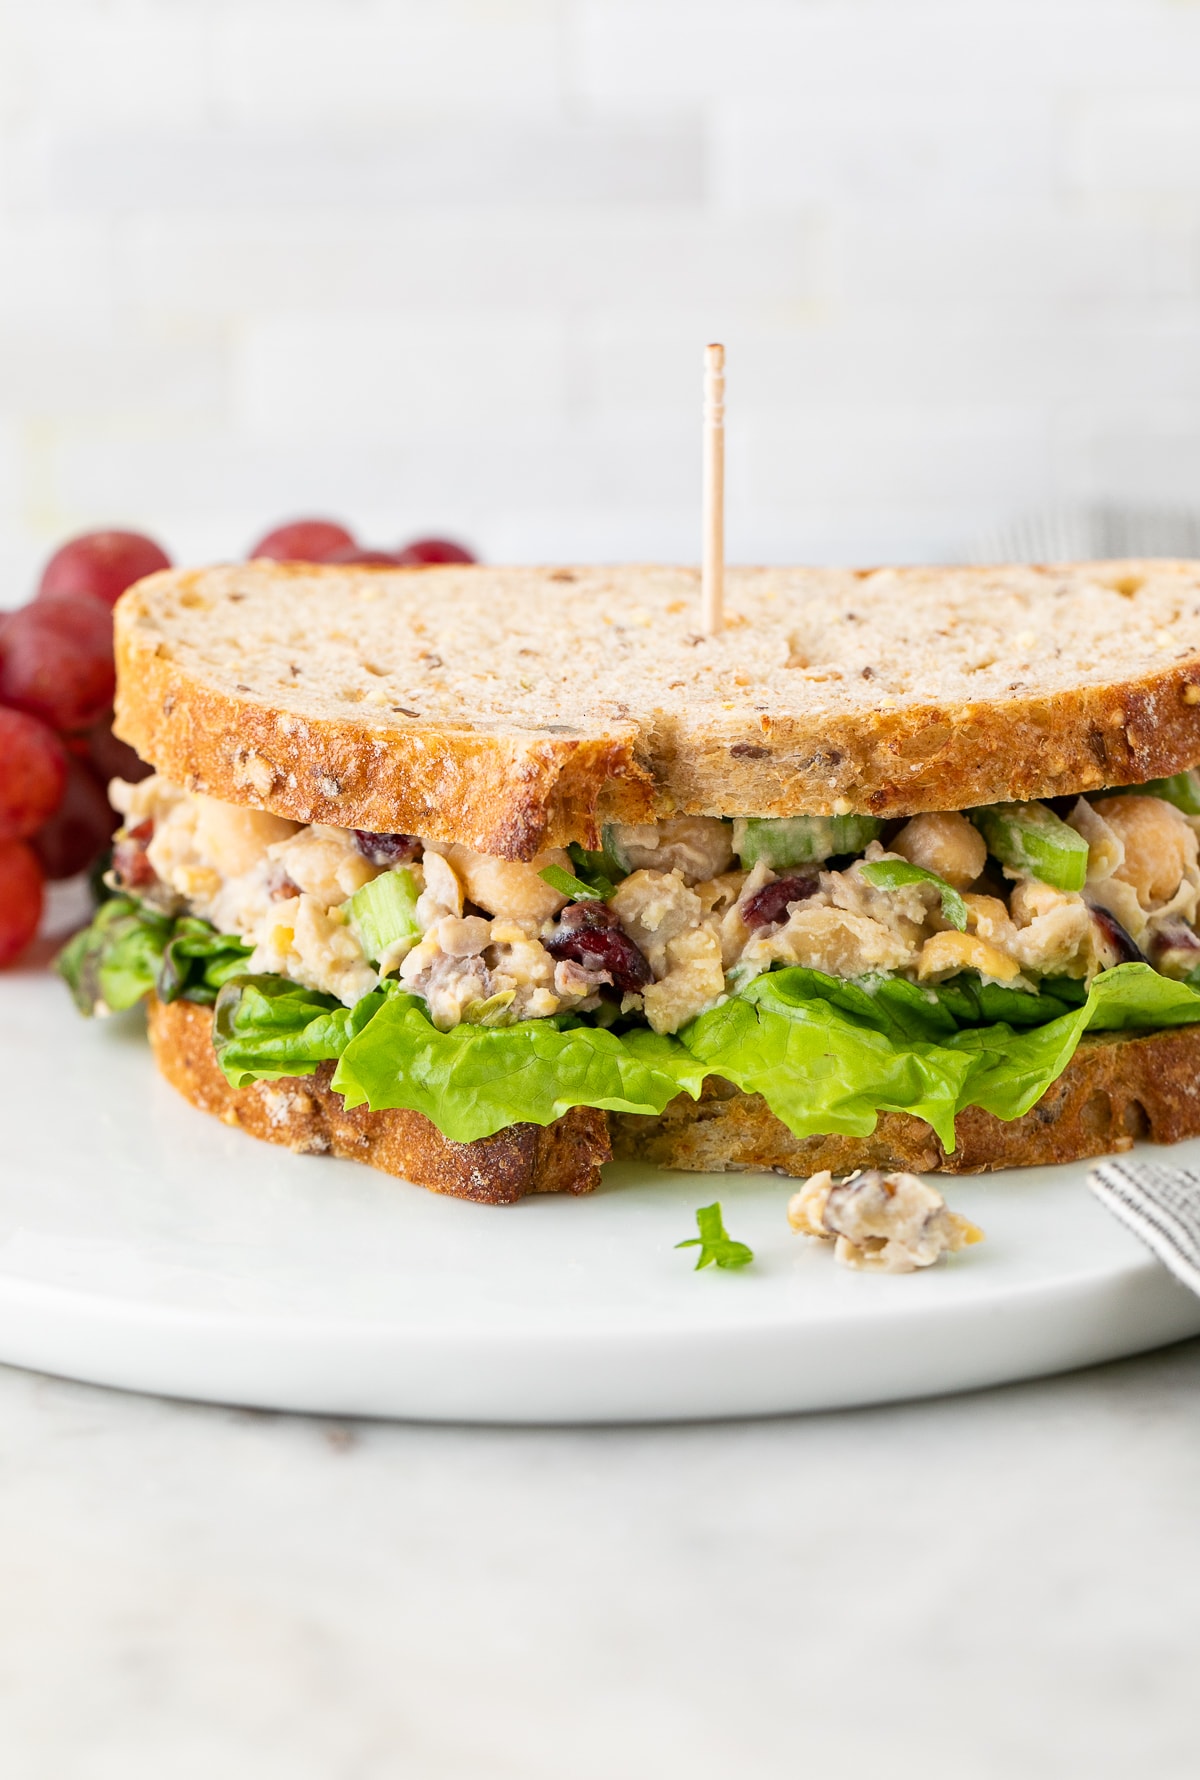 head on view of healthy vegan chicken salad sandwich on a plate with items surrounding.